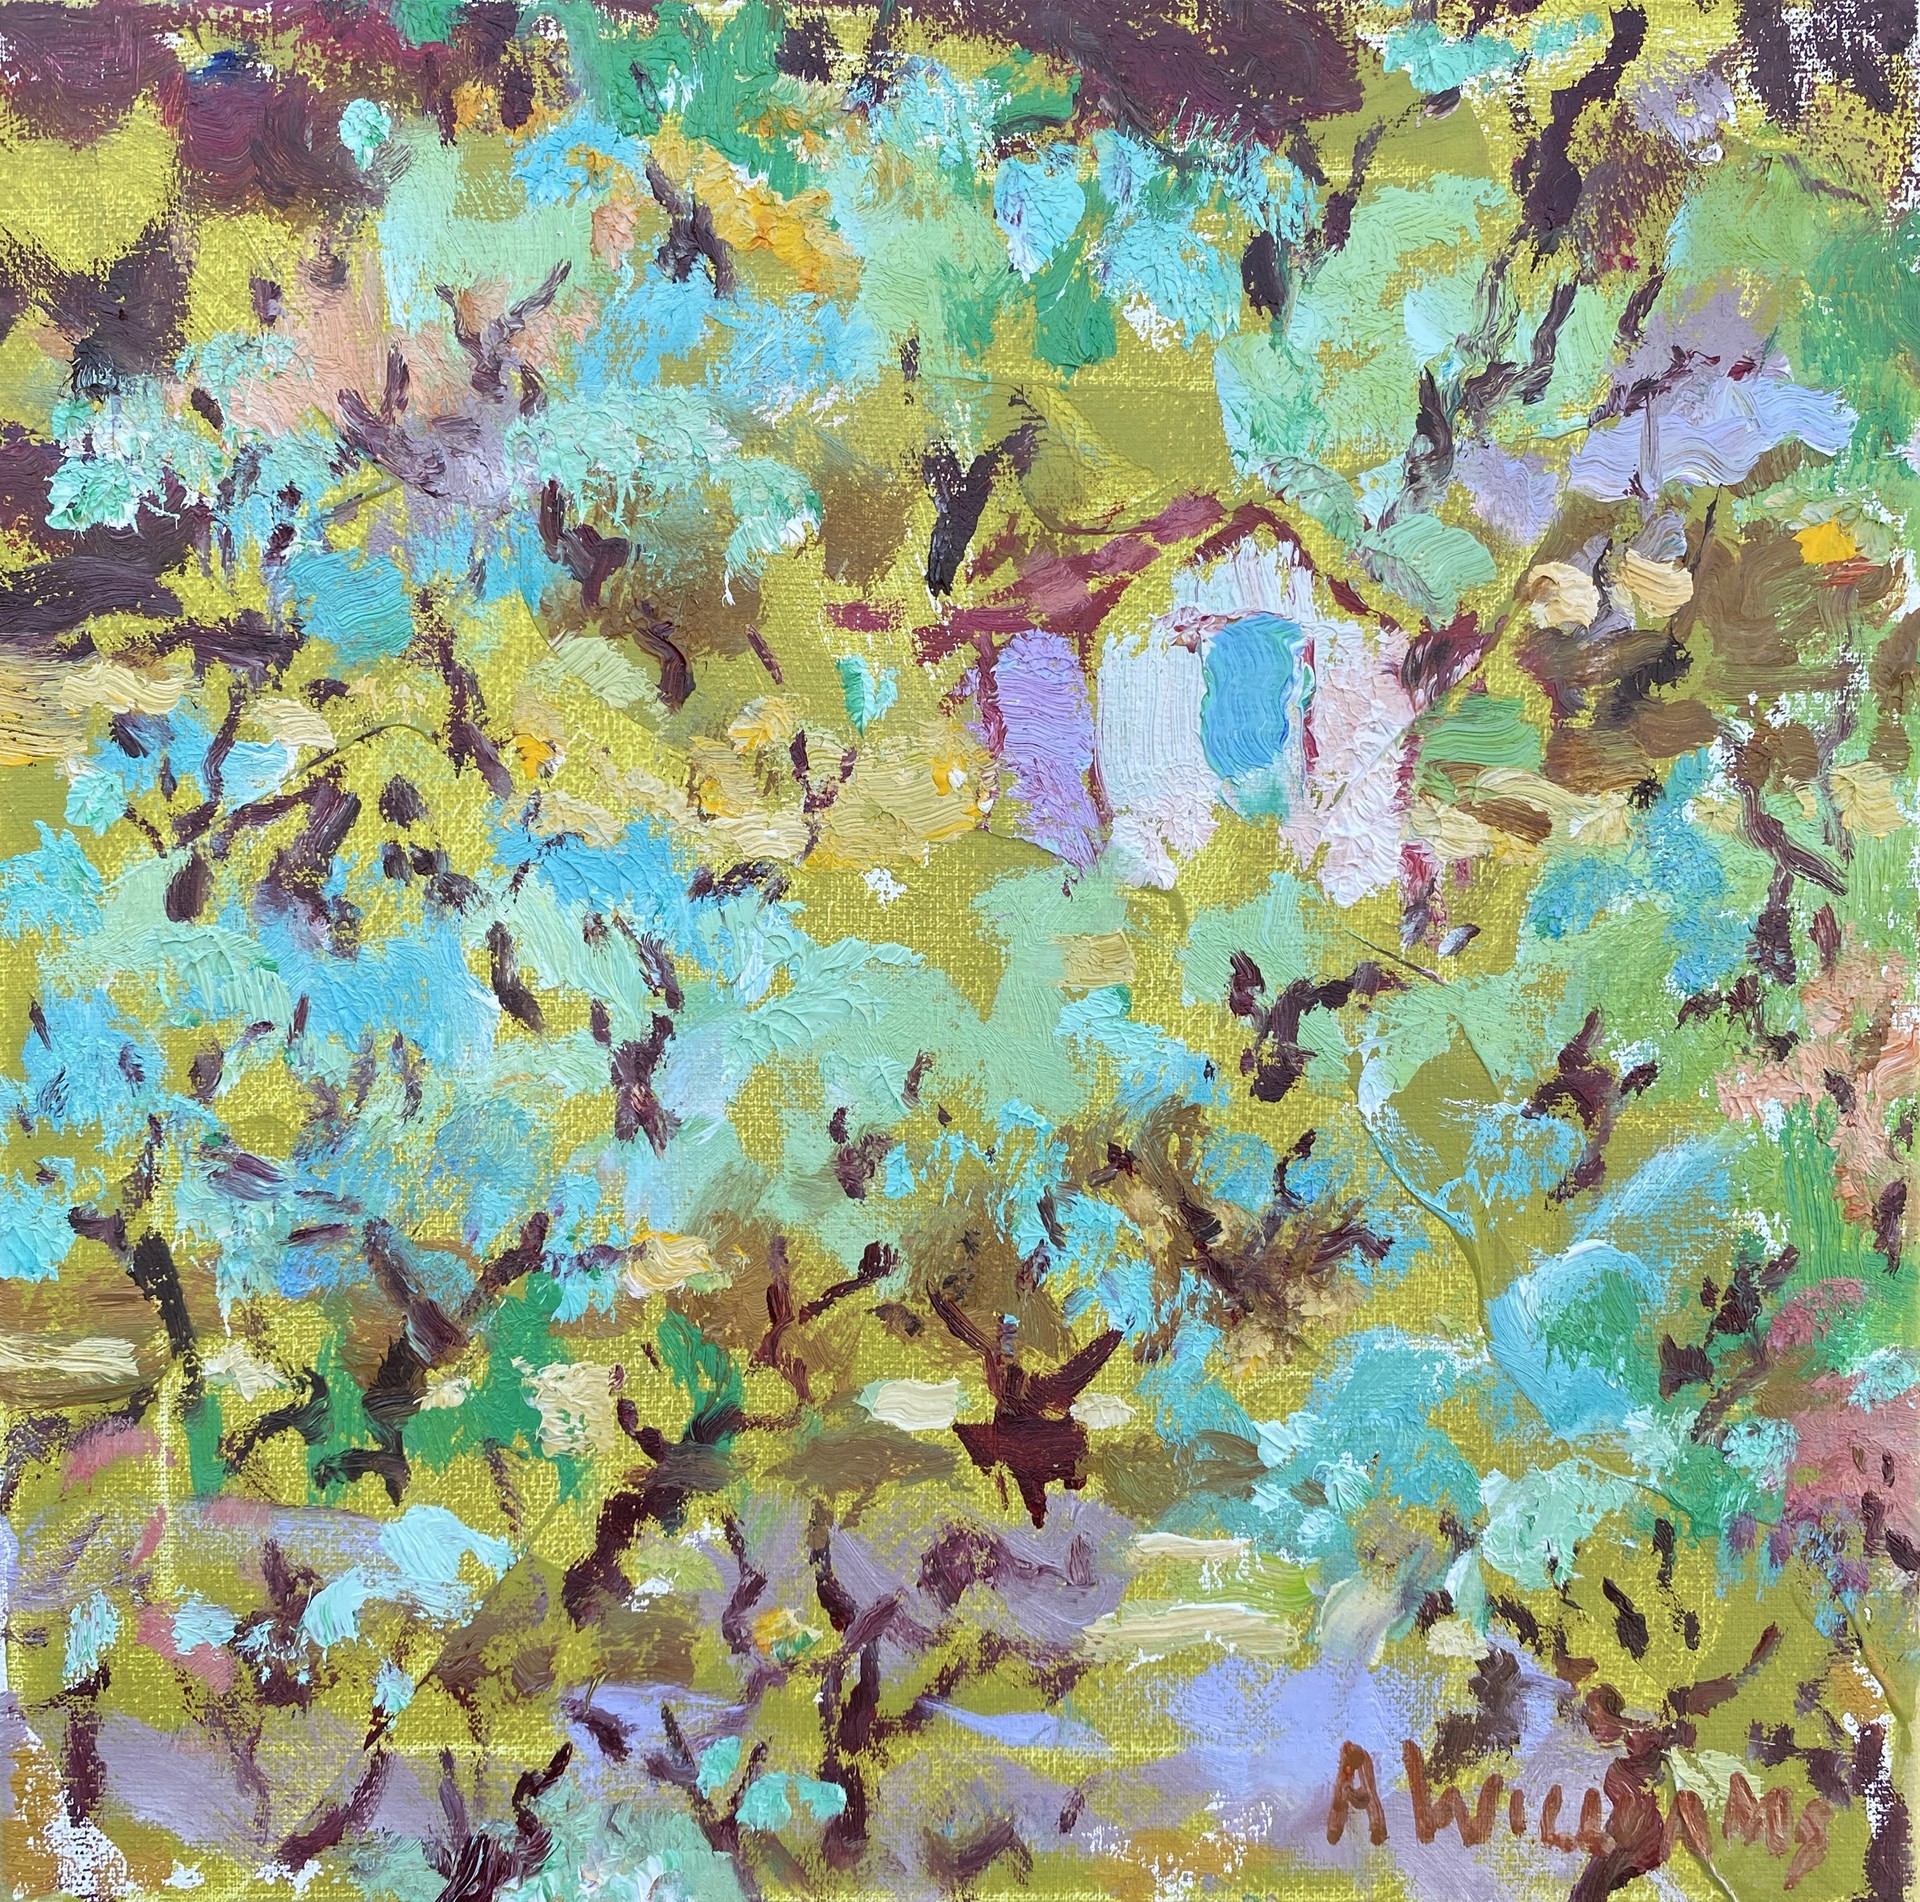 "Once and Olive Grove" original oil painting by Alice Williams